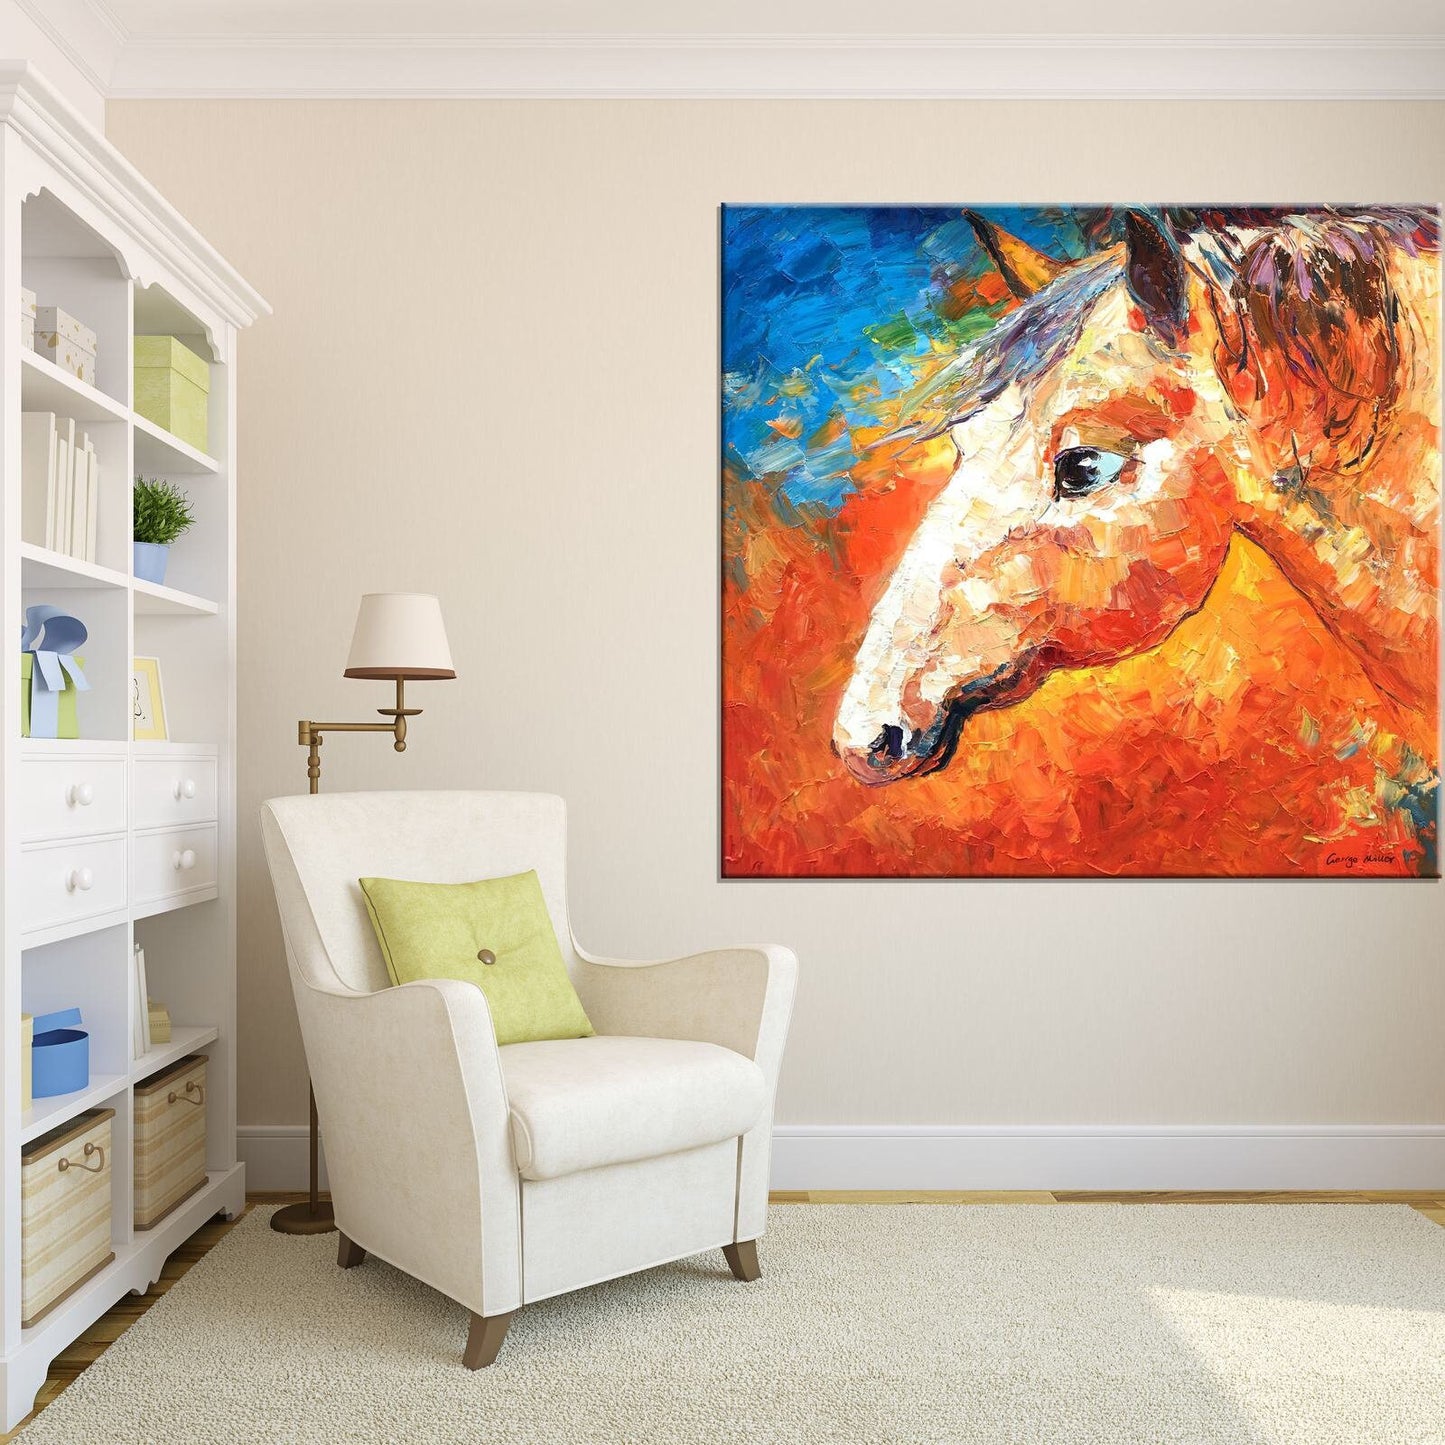 Oil Painting Horse, Contemporary Wall Art, Canvas Painting, Wall Decor, Modern Painting, Horse Wall Art, Original Art, Large Oil Painting